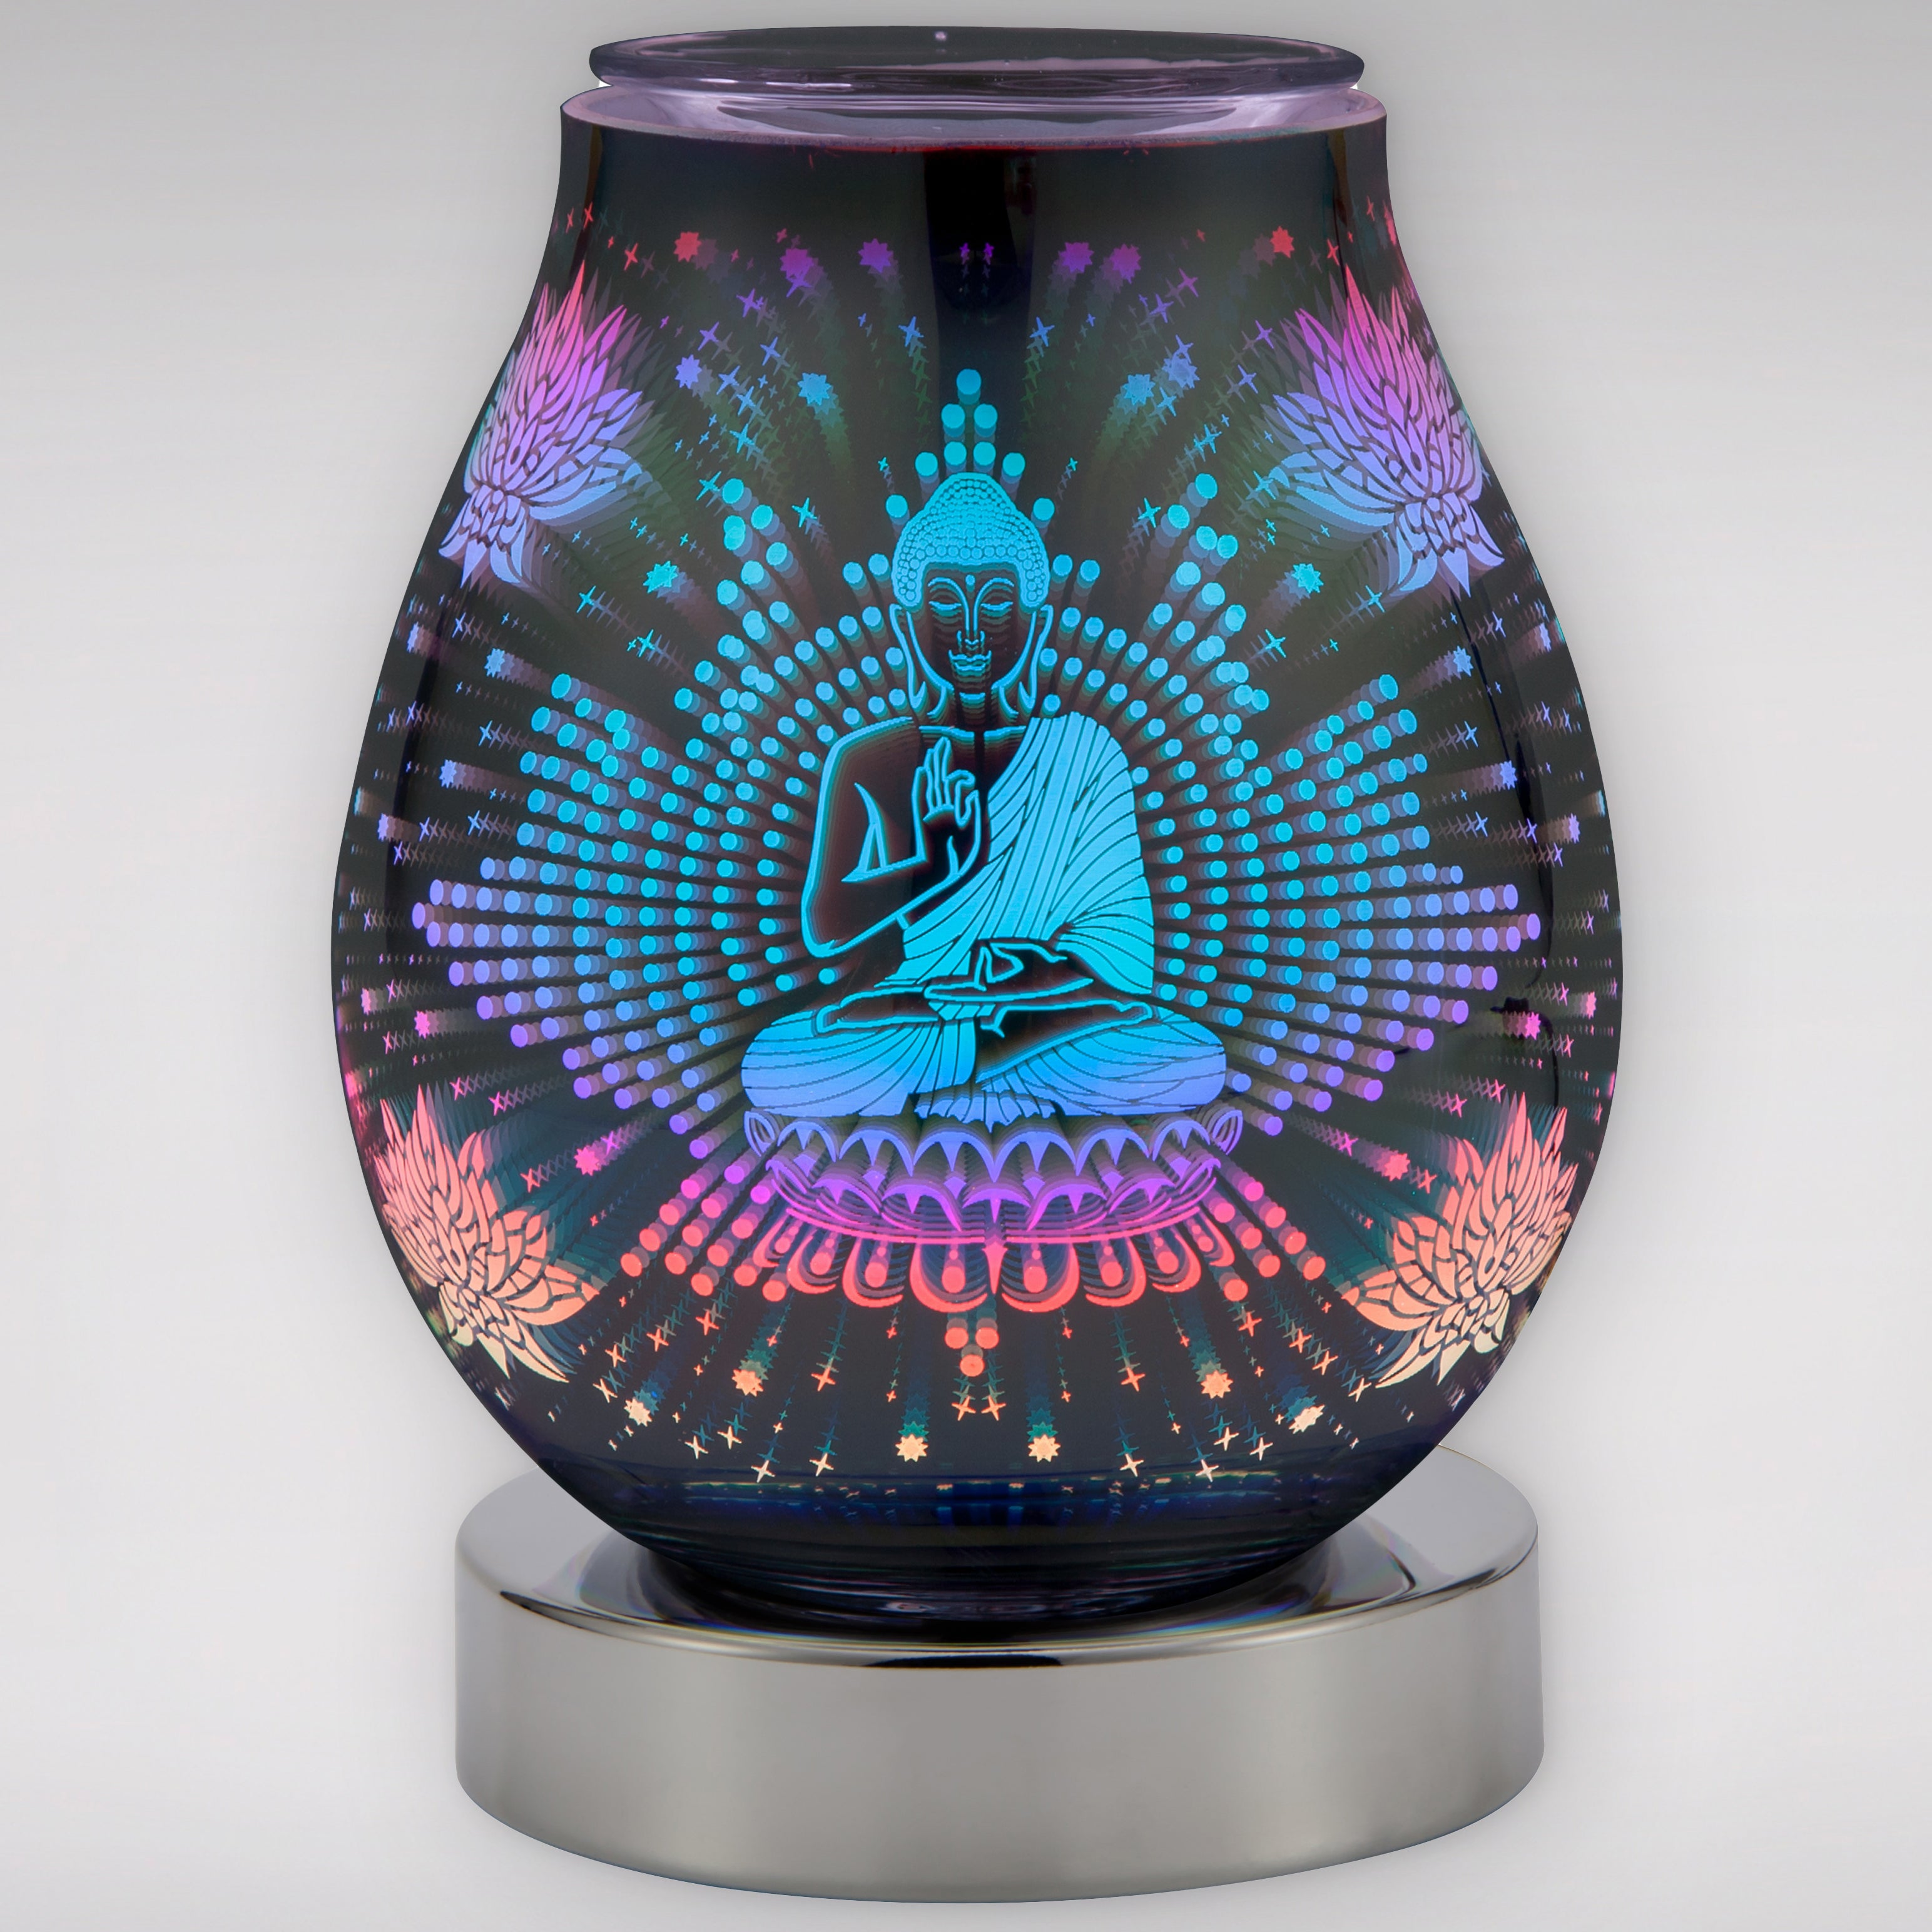 Scentchips Warmer 3D LED 'Buddha' Colour Changing Display